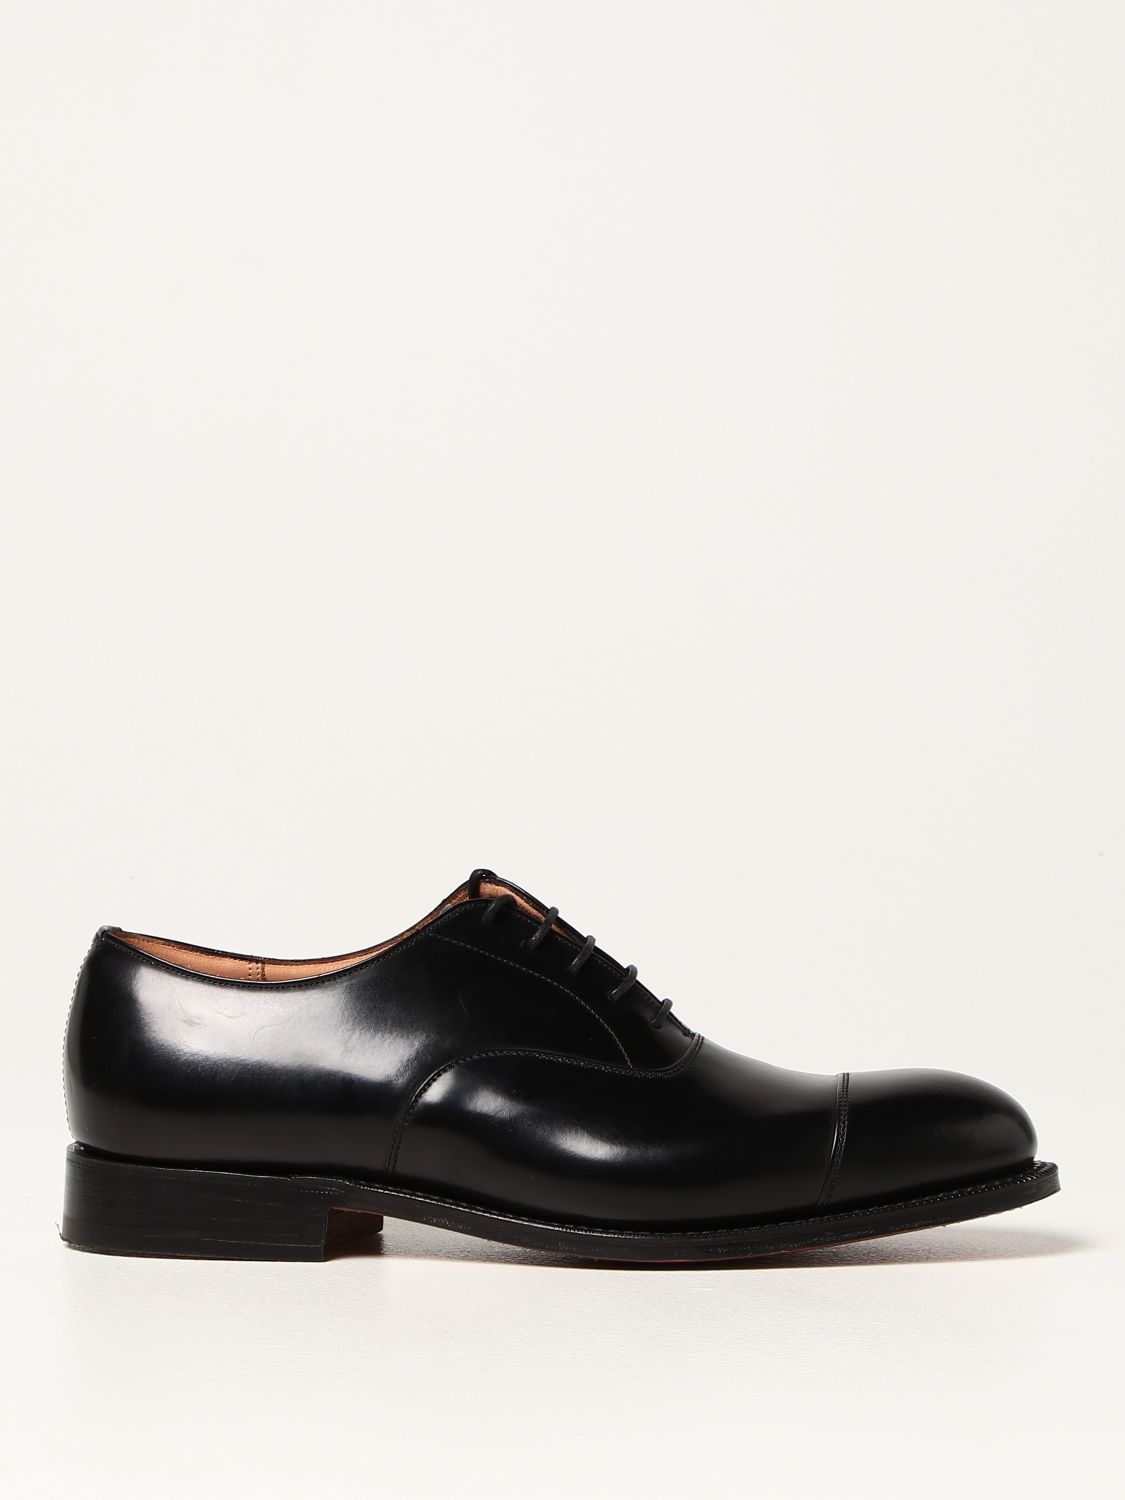 CHURCH'S: Consul 173 brushed leather derby shoes - Black | Church's ...